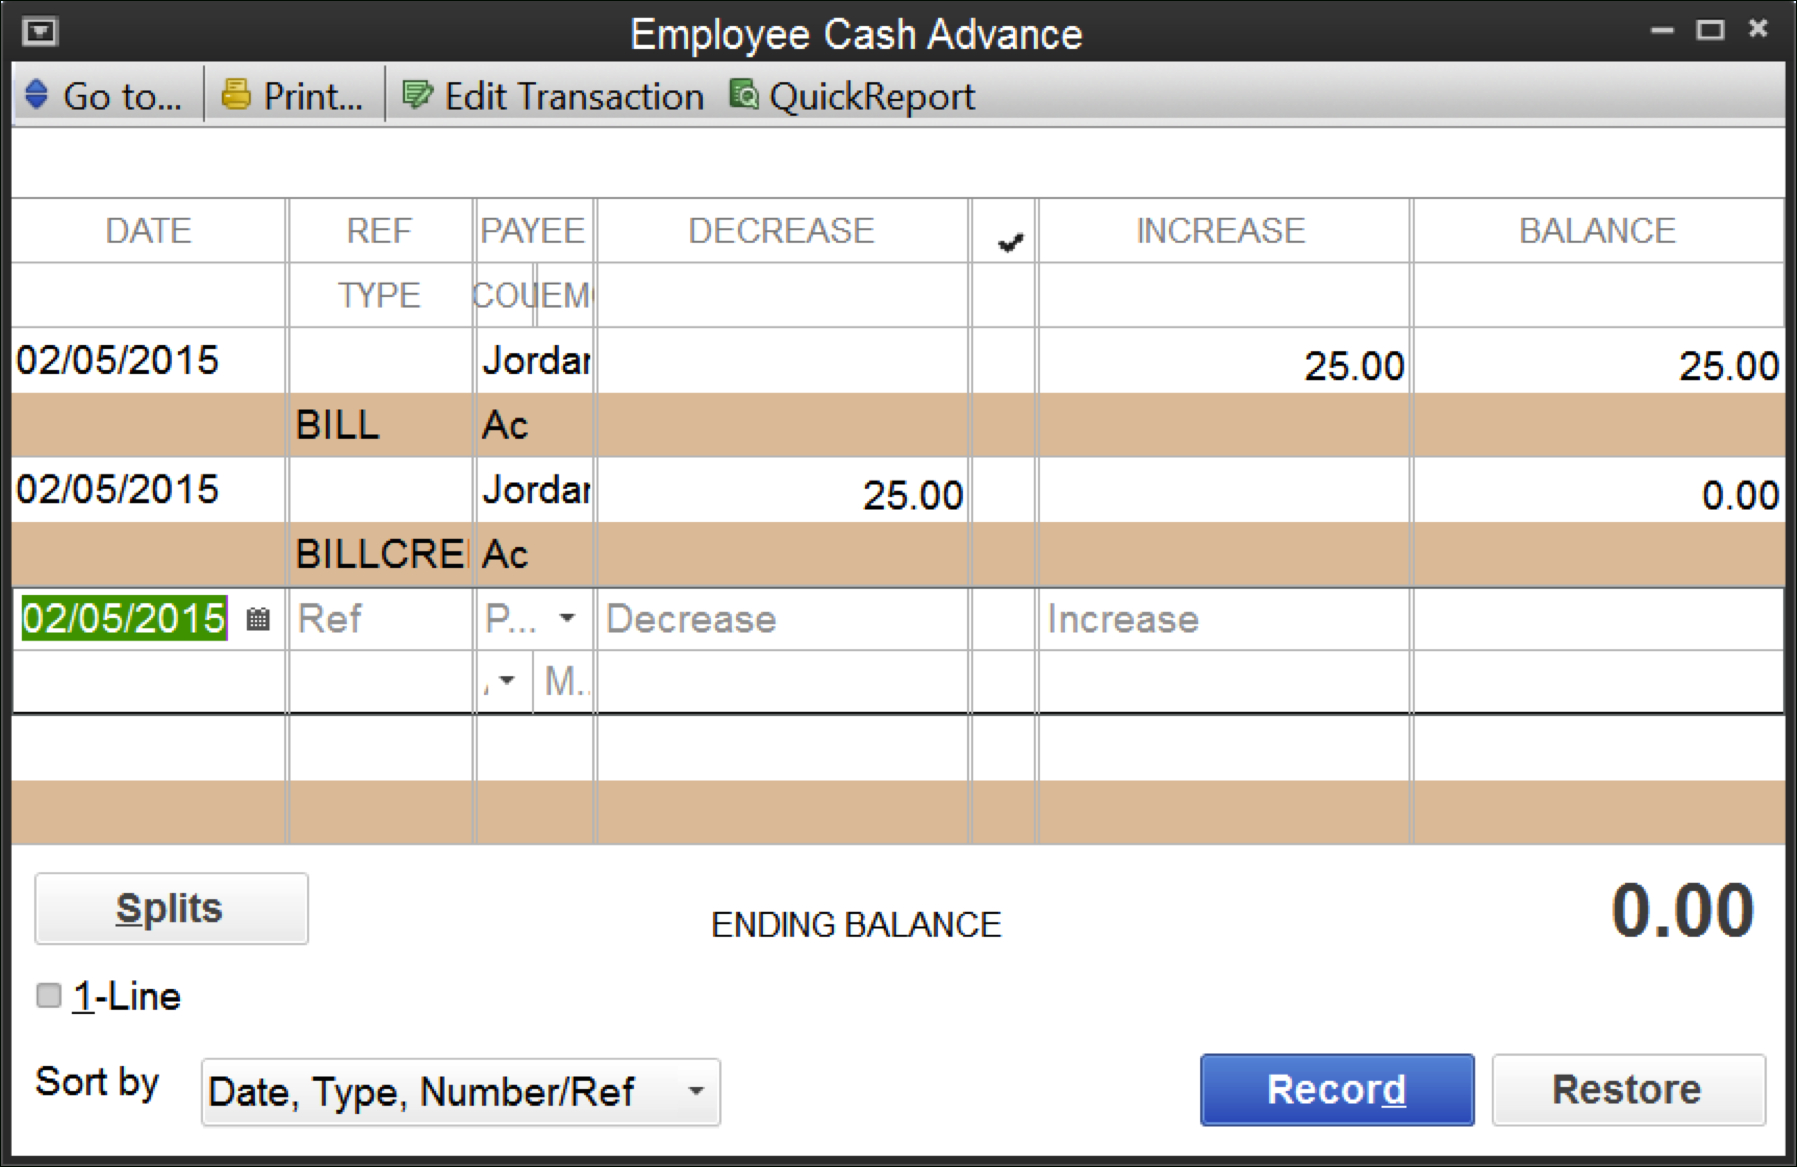 Gas Mileage Expense Report Template ] – Template Employee Inside Gas Mileage Expense Report Template